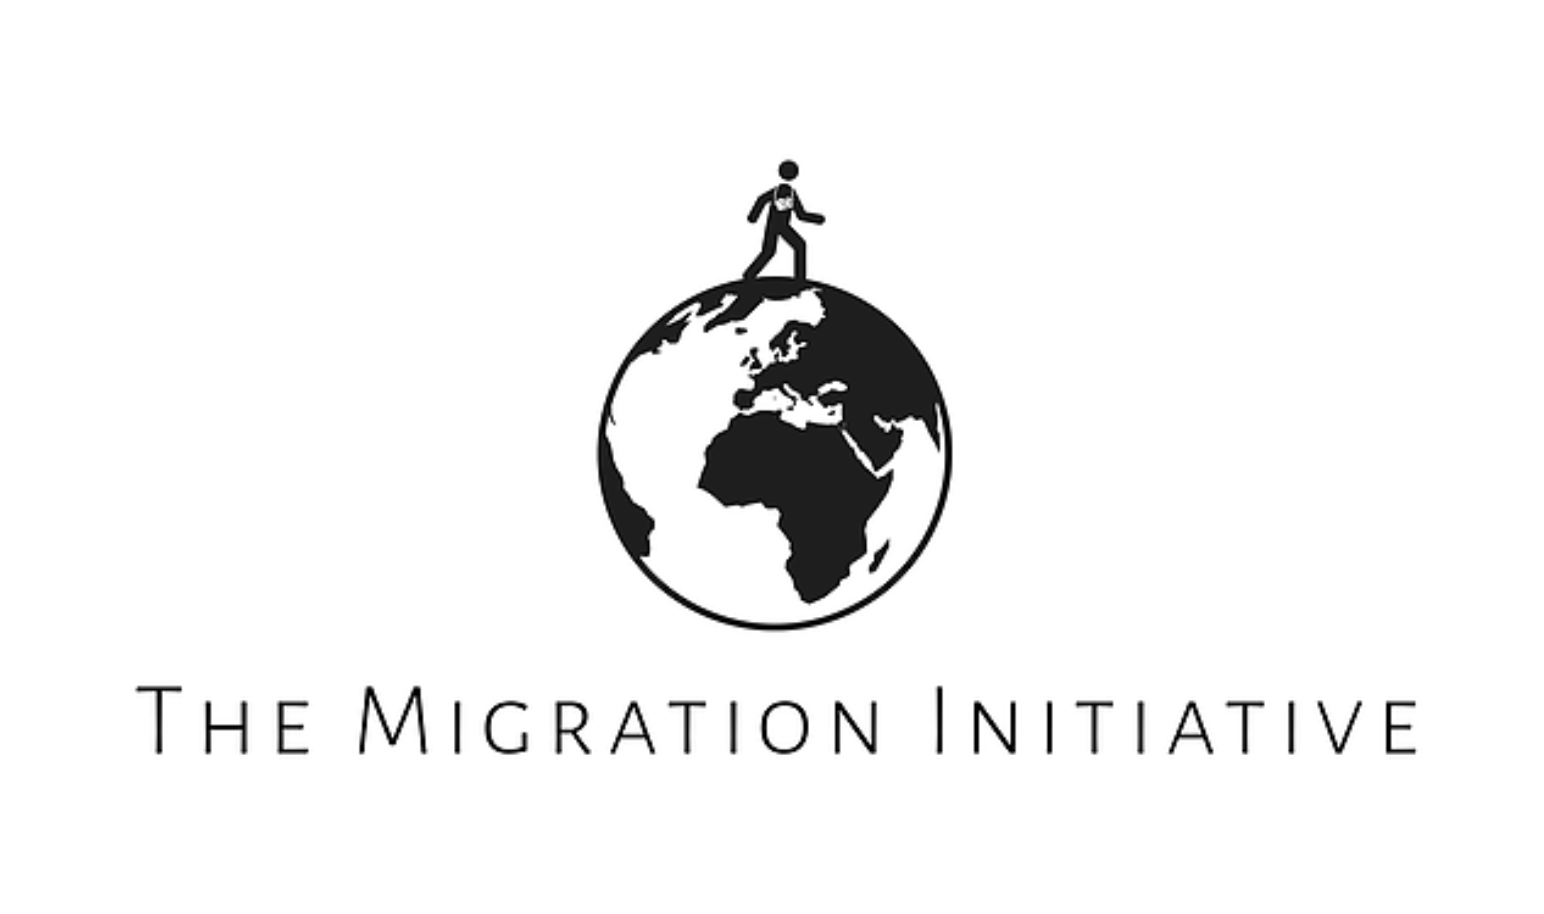 The Migration Initiative logo (person walking on globe)